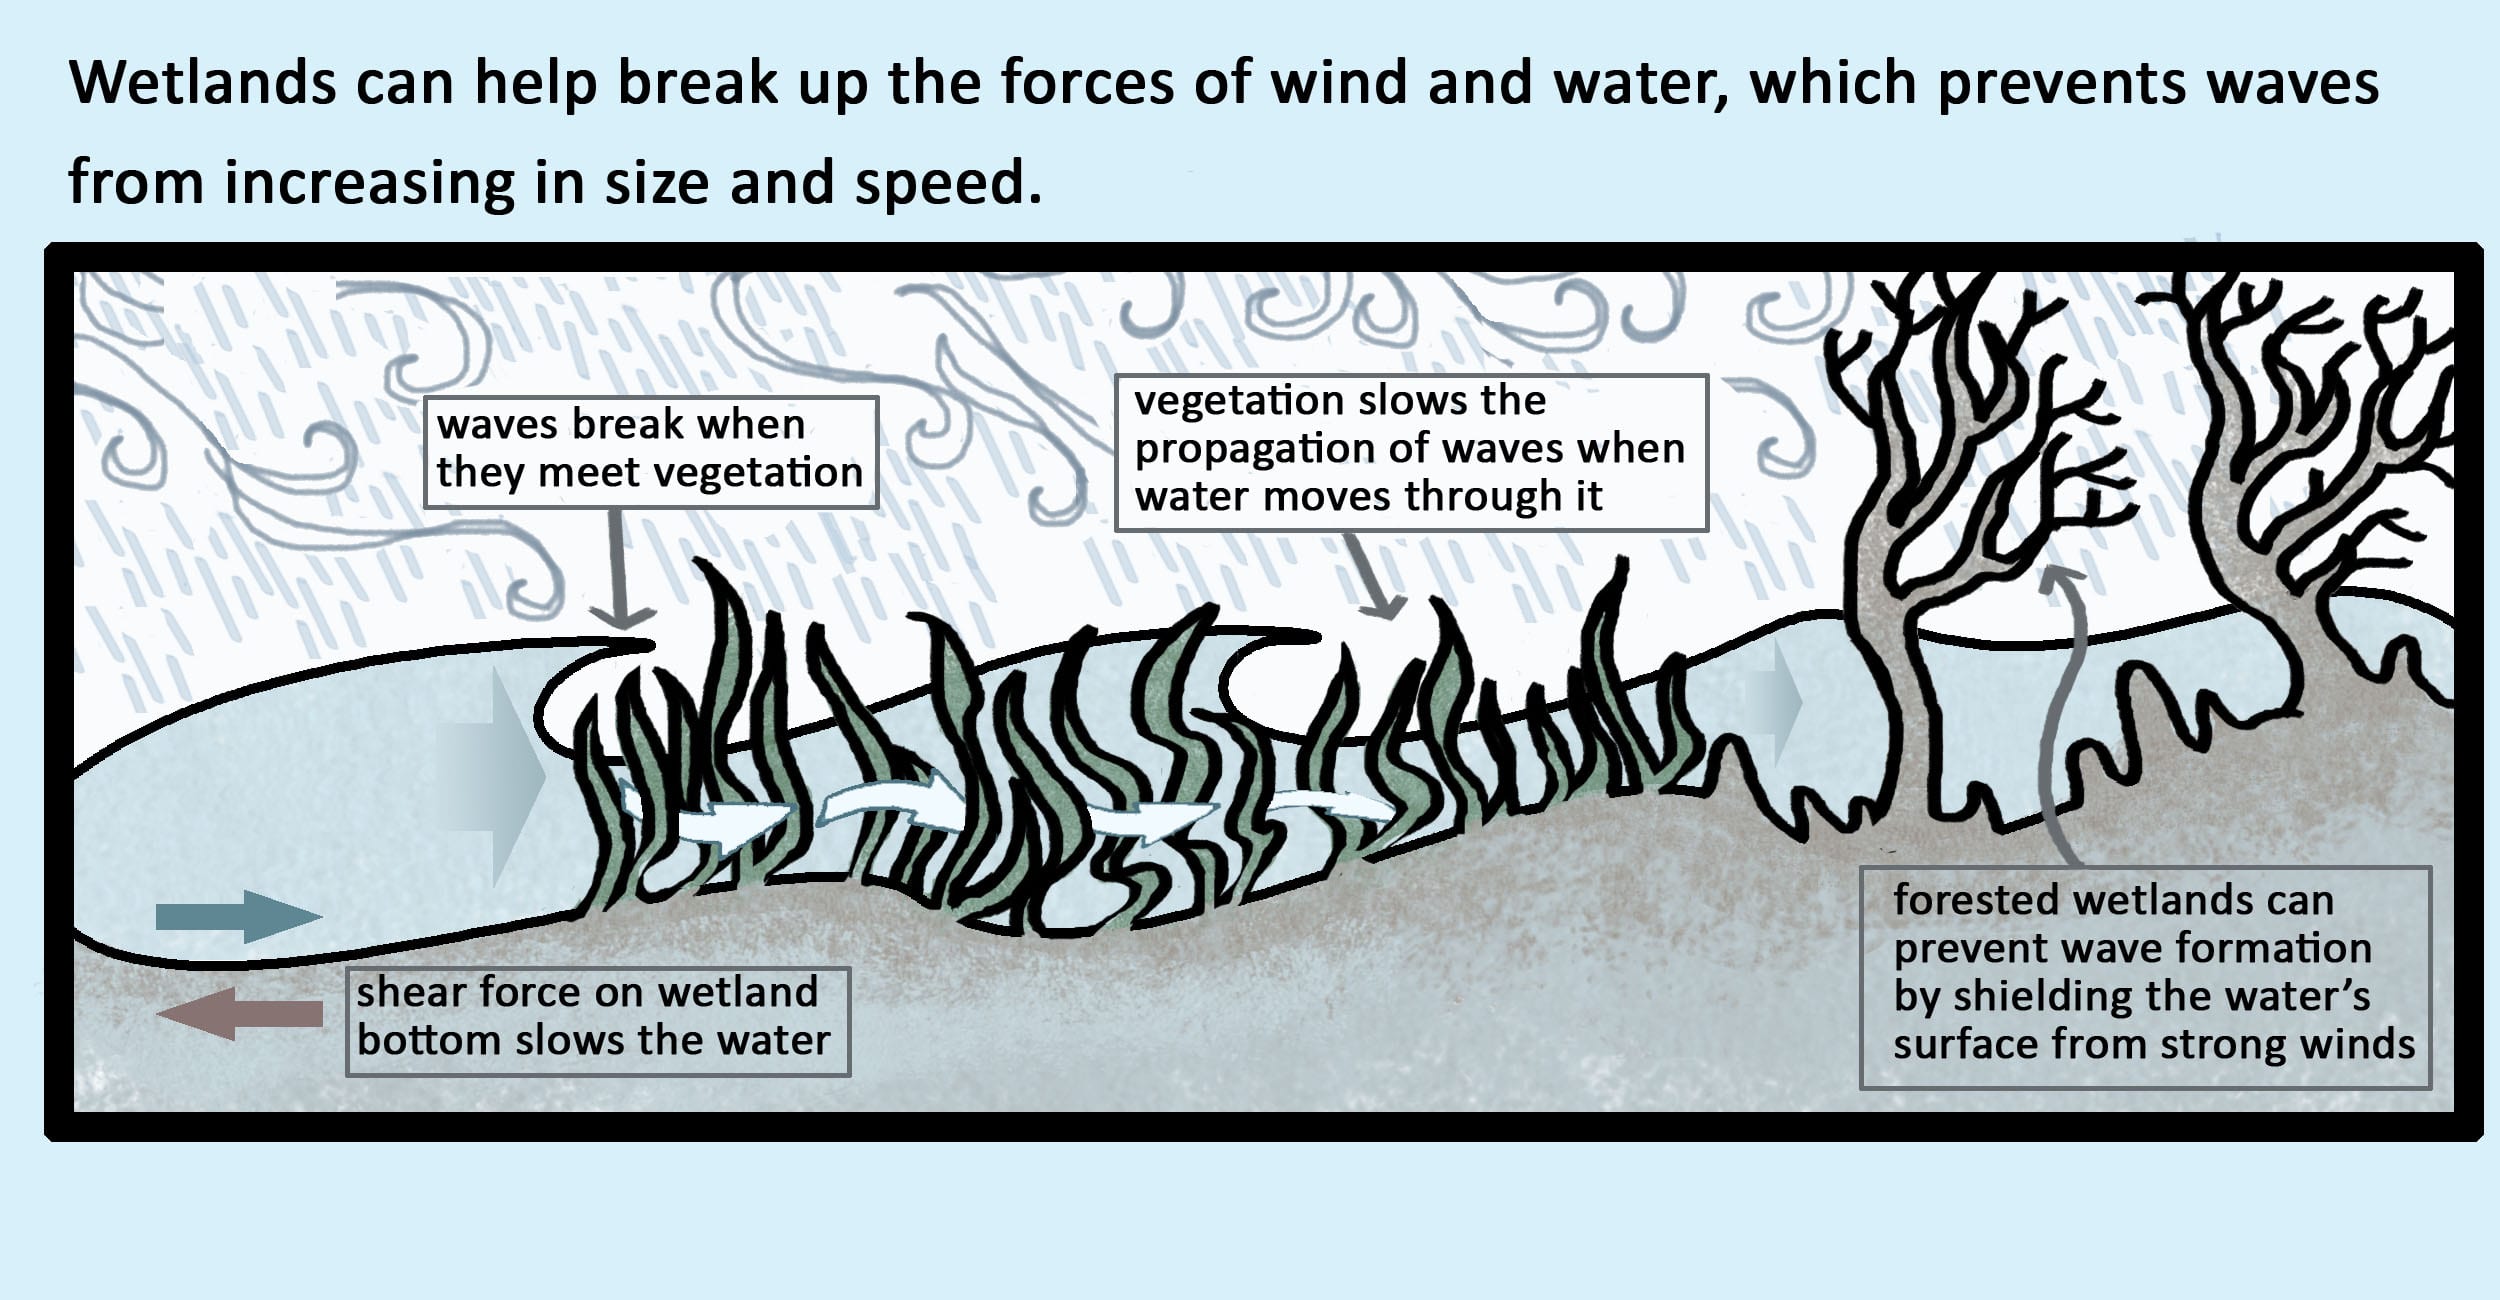 Wetlands can help break up the forces of wind and water, which prevents waves from increasing in size